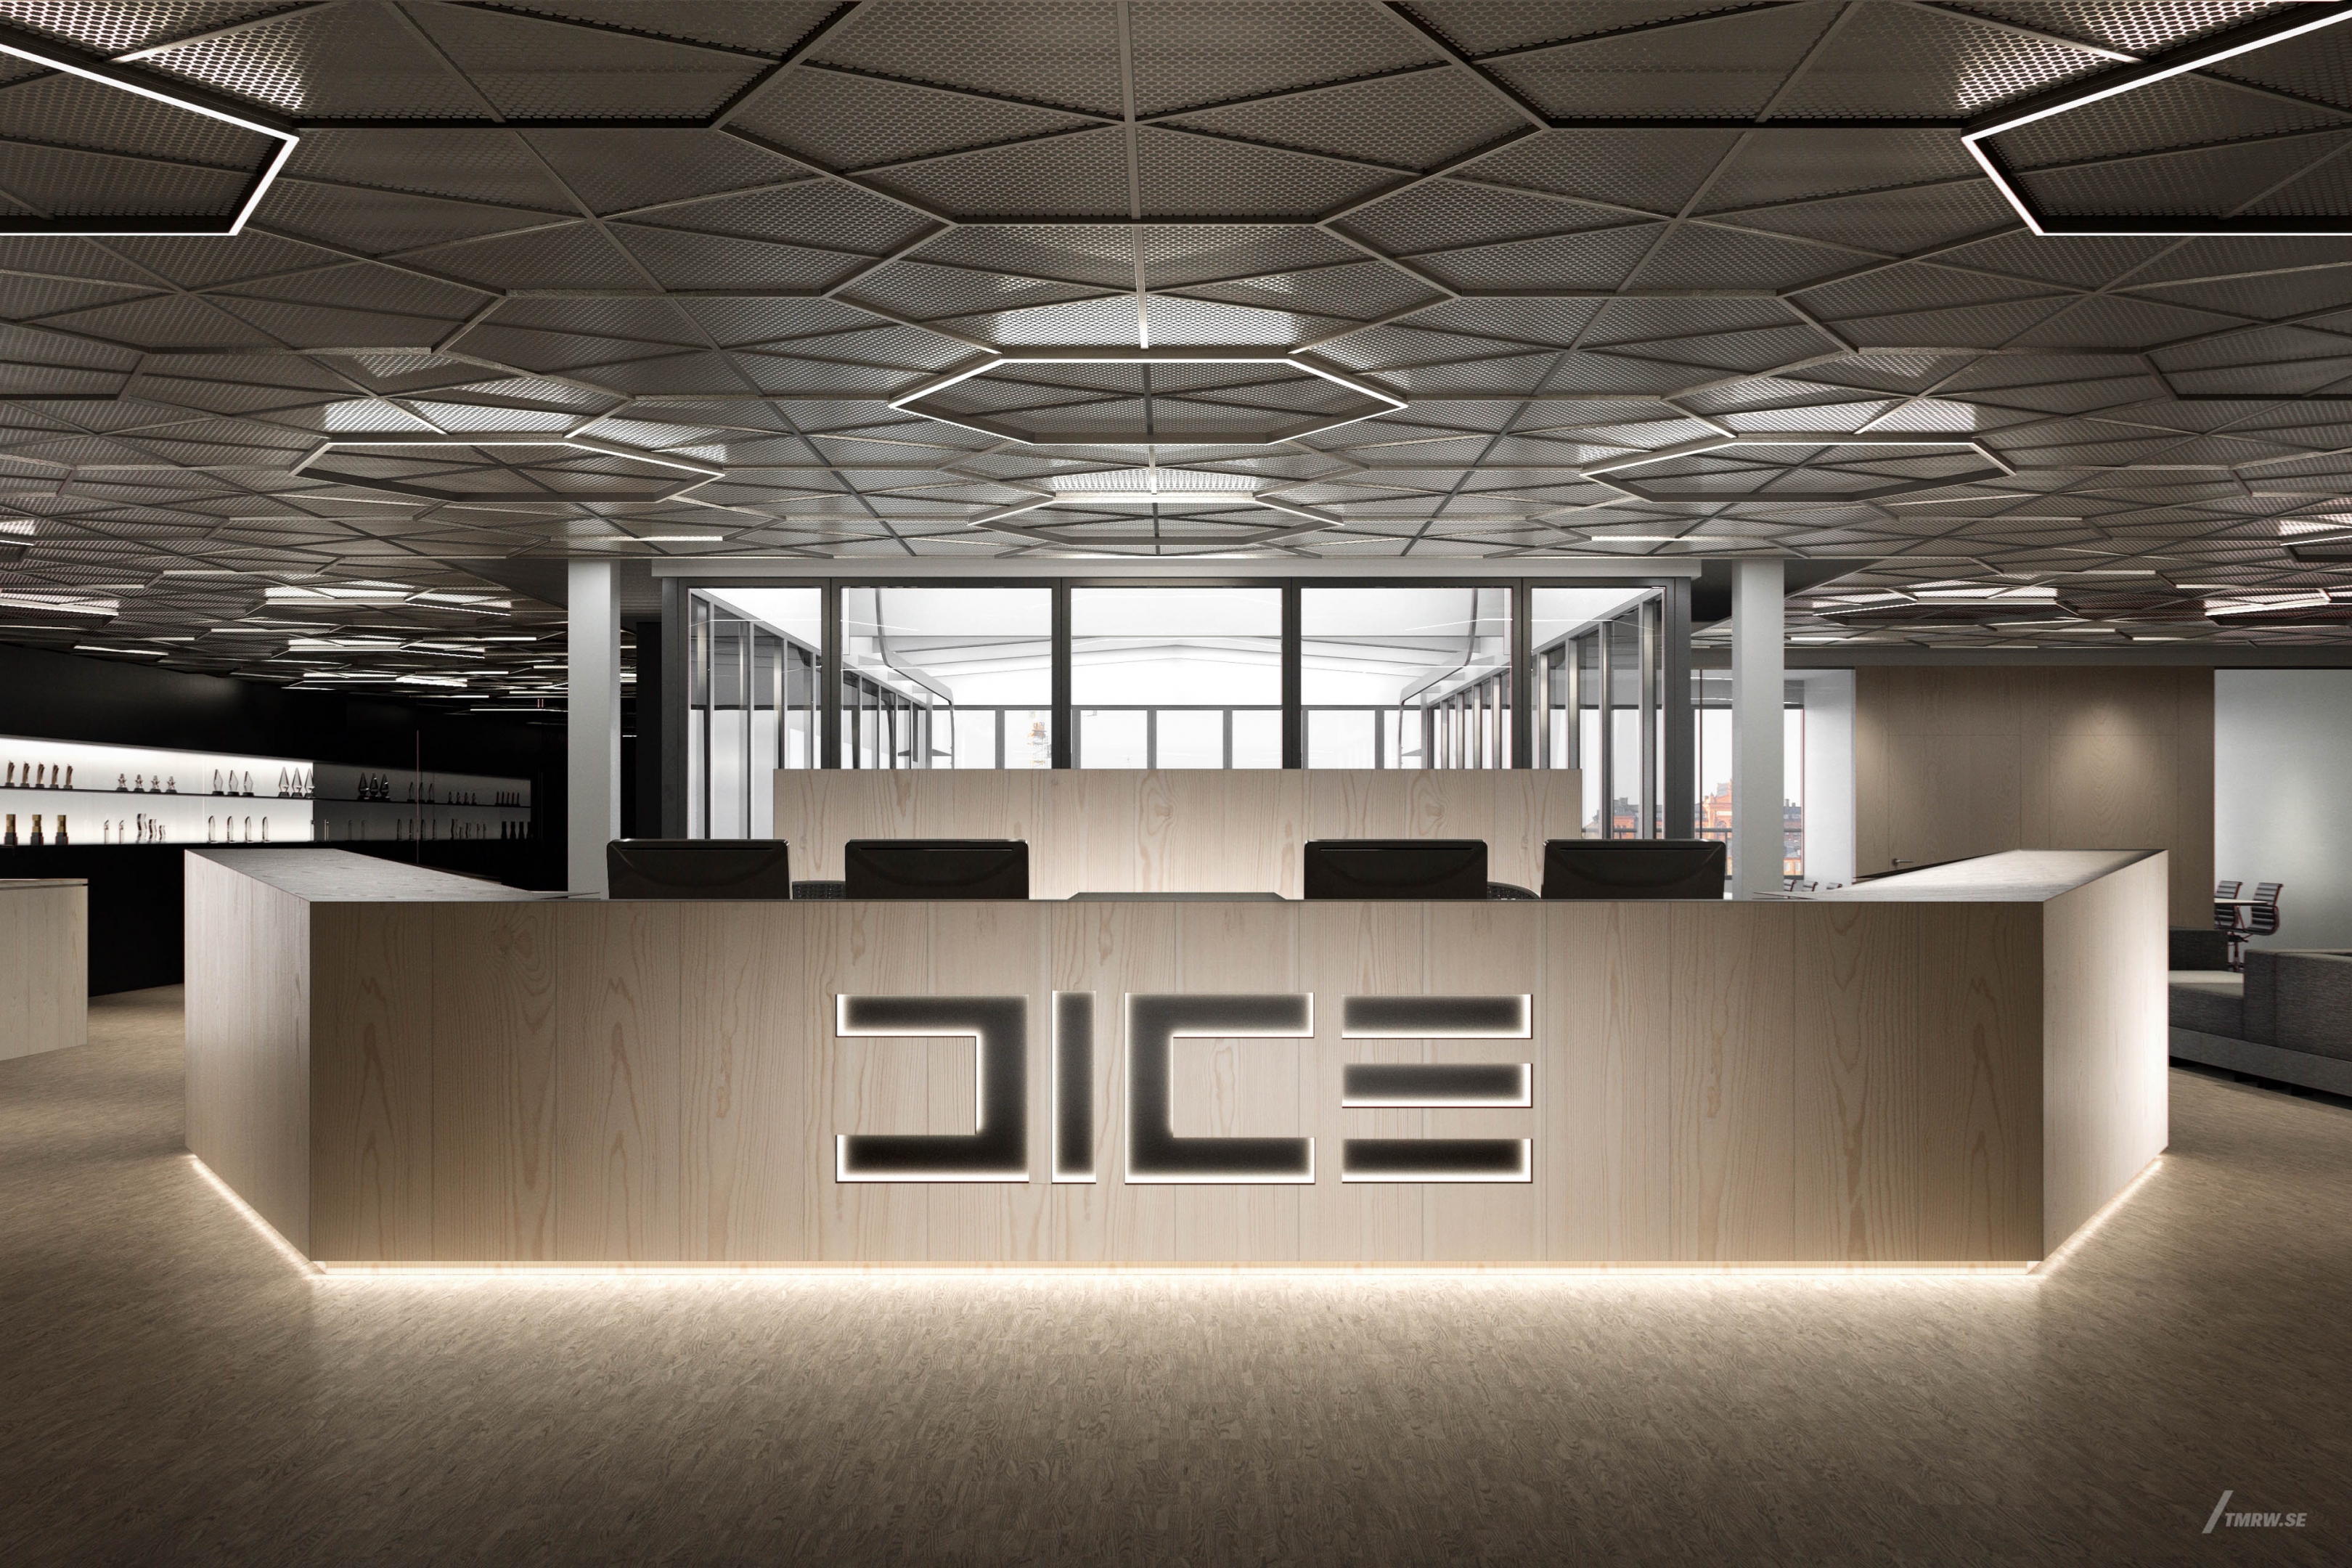 Architectural visualization of Dice for Studio Stockhom, a reception in dim light from an eye level view.